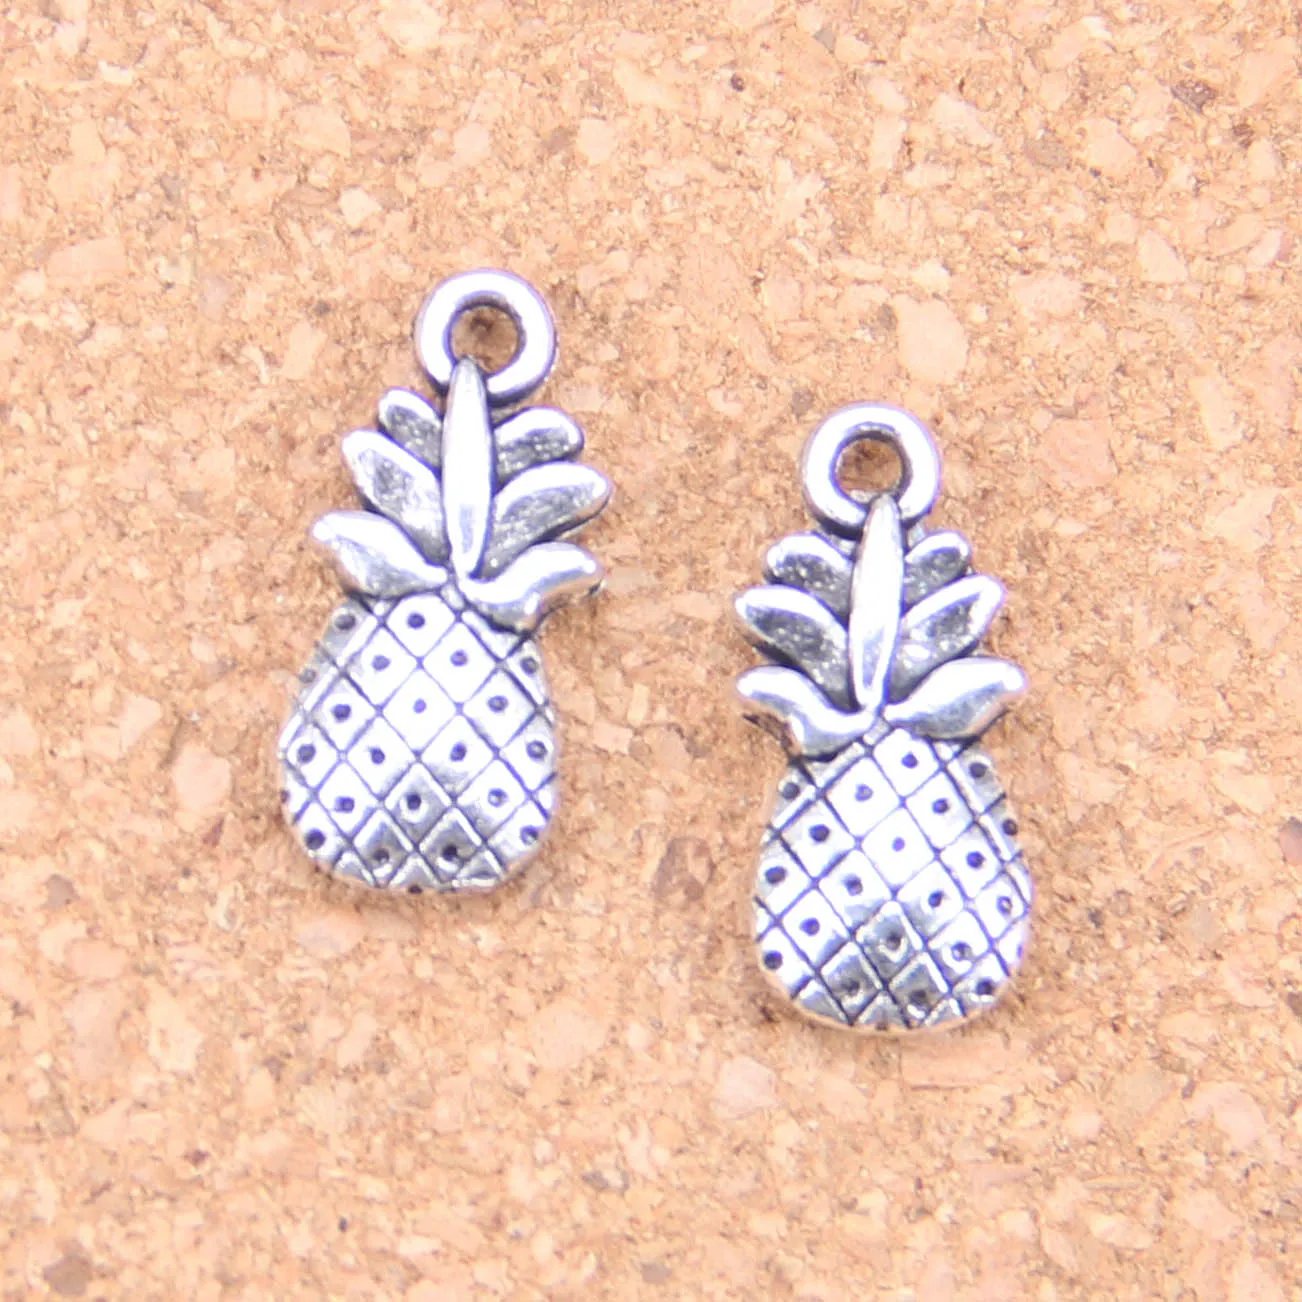 Antique Silver Plated Bronze Plated double sided pineapple Charms Pendant DIY Necklace Bracelet Bangle Findings 19 9mm2580